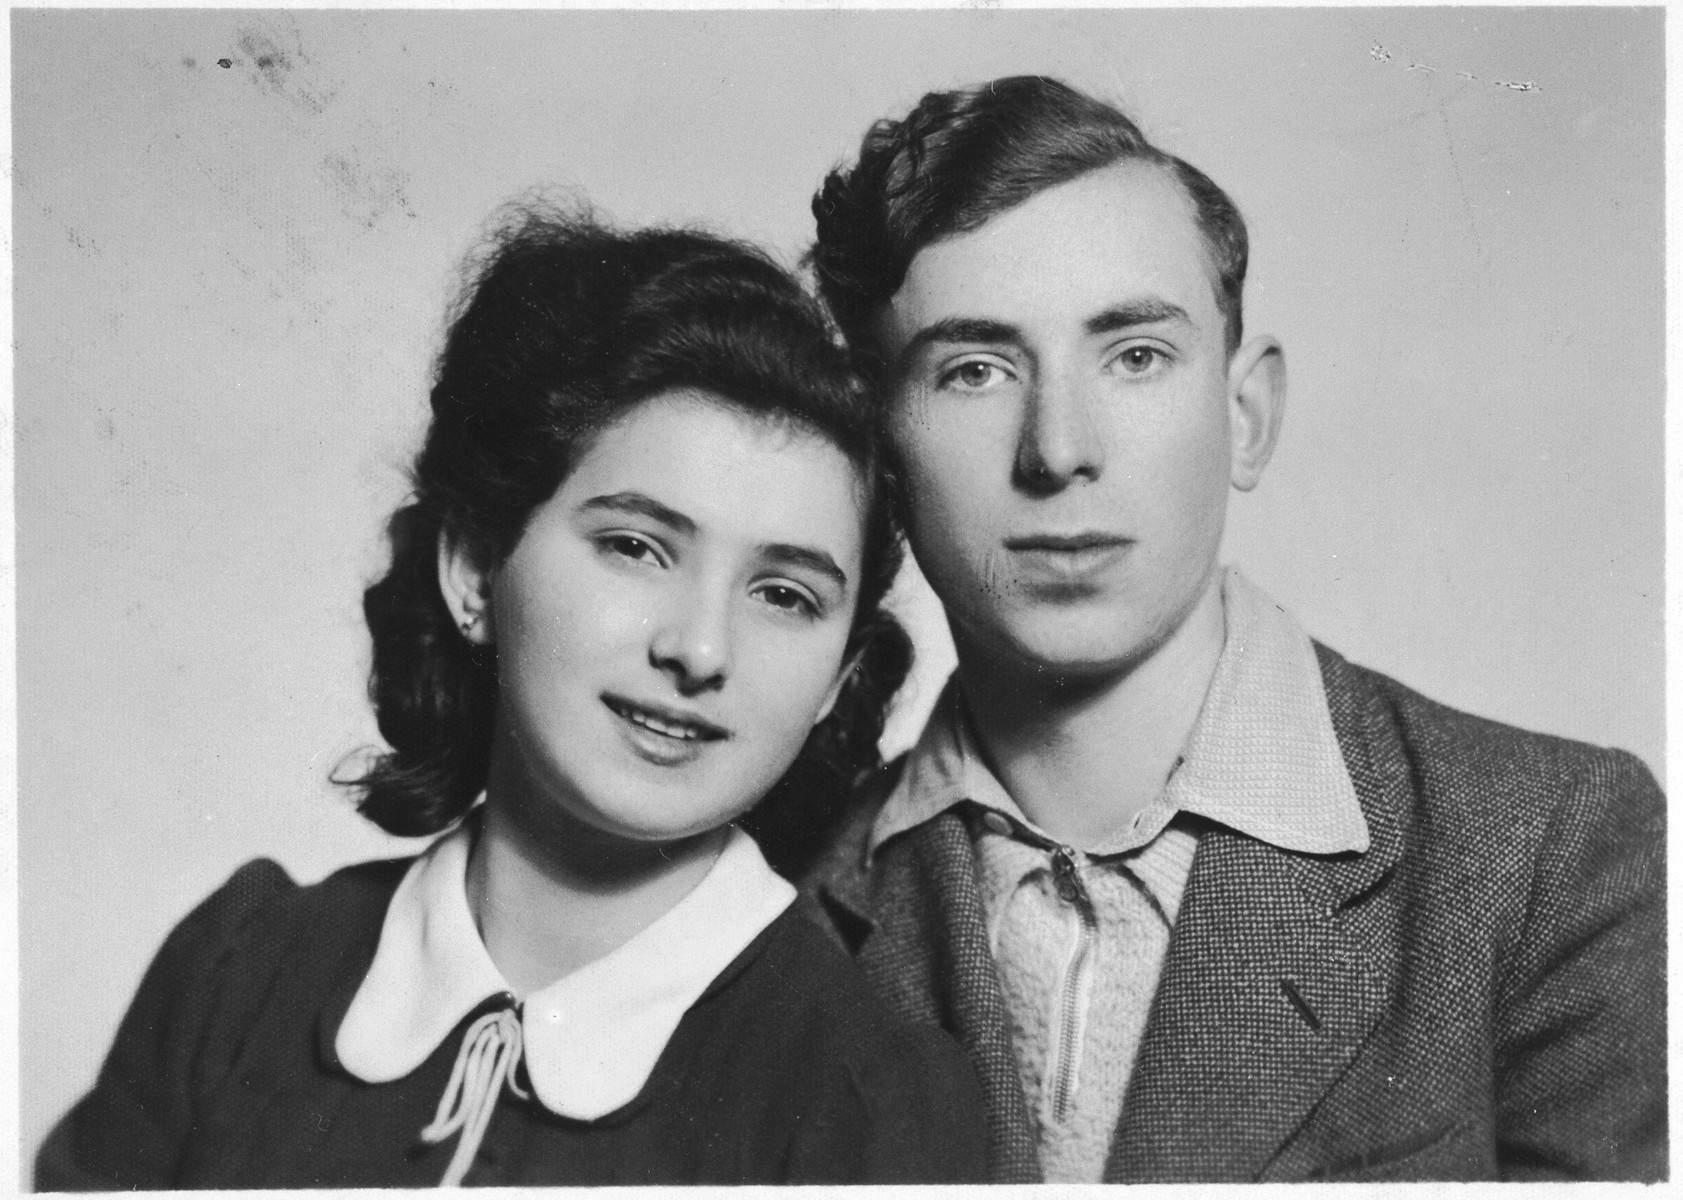 Close-up portrait of Zigi and Erma Zimmerstark (cousins of the donor) taken in the Krakow ghetto and sent to a relative in the United States.